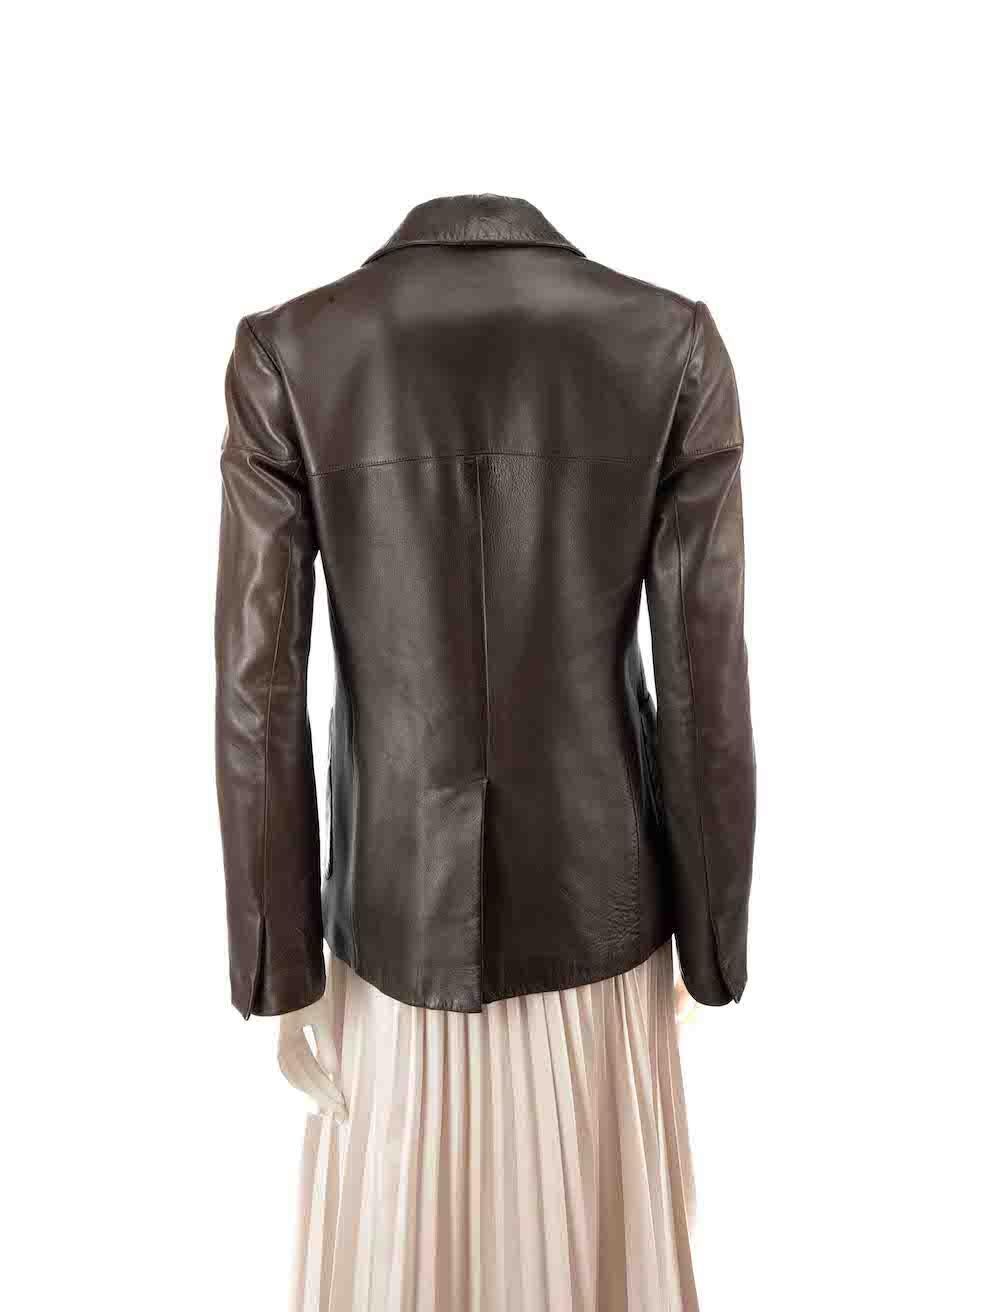 Jil Sander Brown Leather Single Breasted Blazer Size M In Excellent Condition For Sale In London, GB